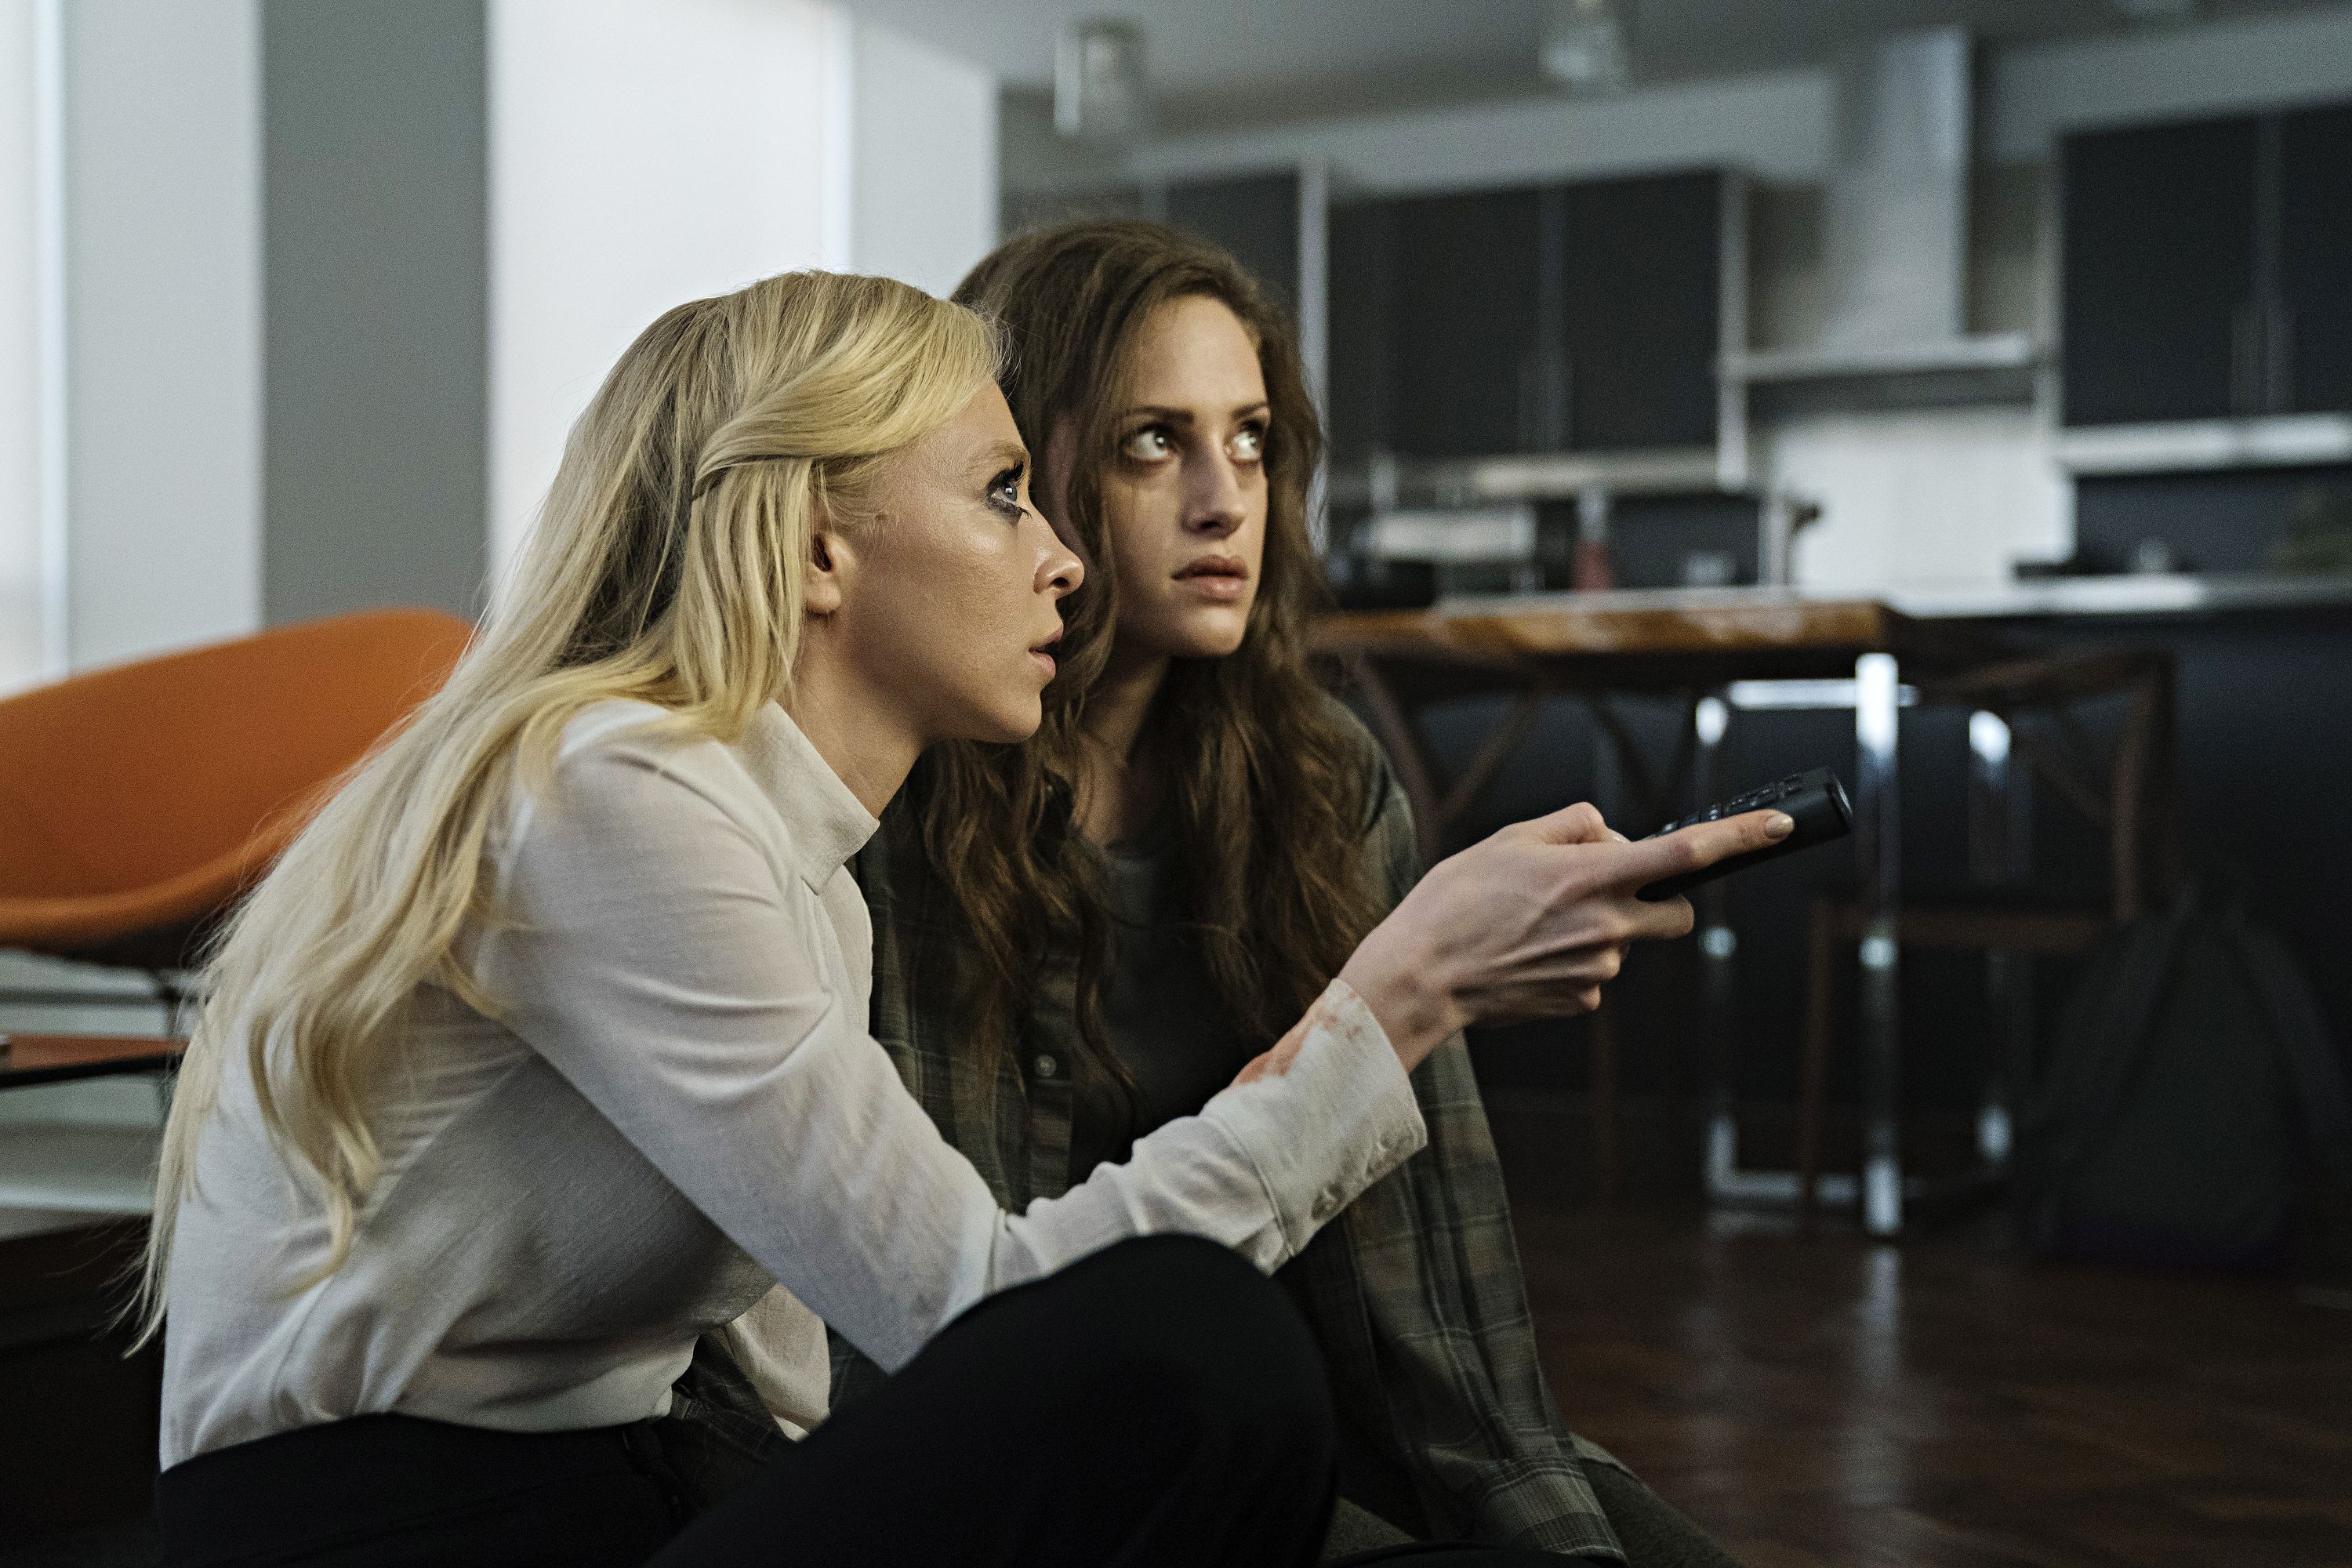 Mr Robot season 2 finale synopsis out: What is next in store for Elliot,  Angela and Darlene?